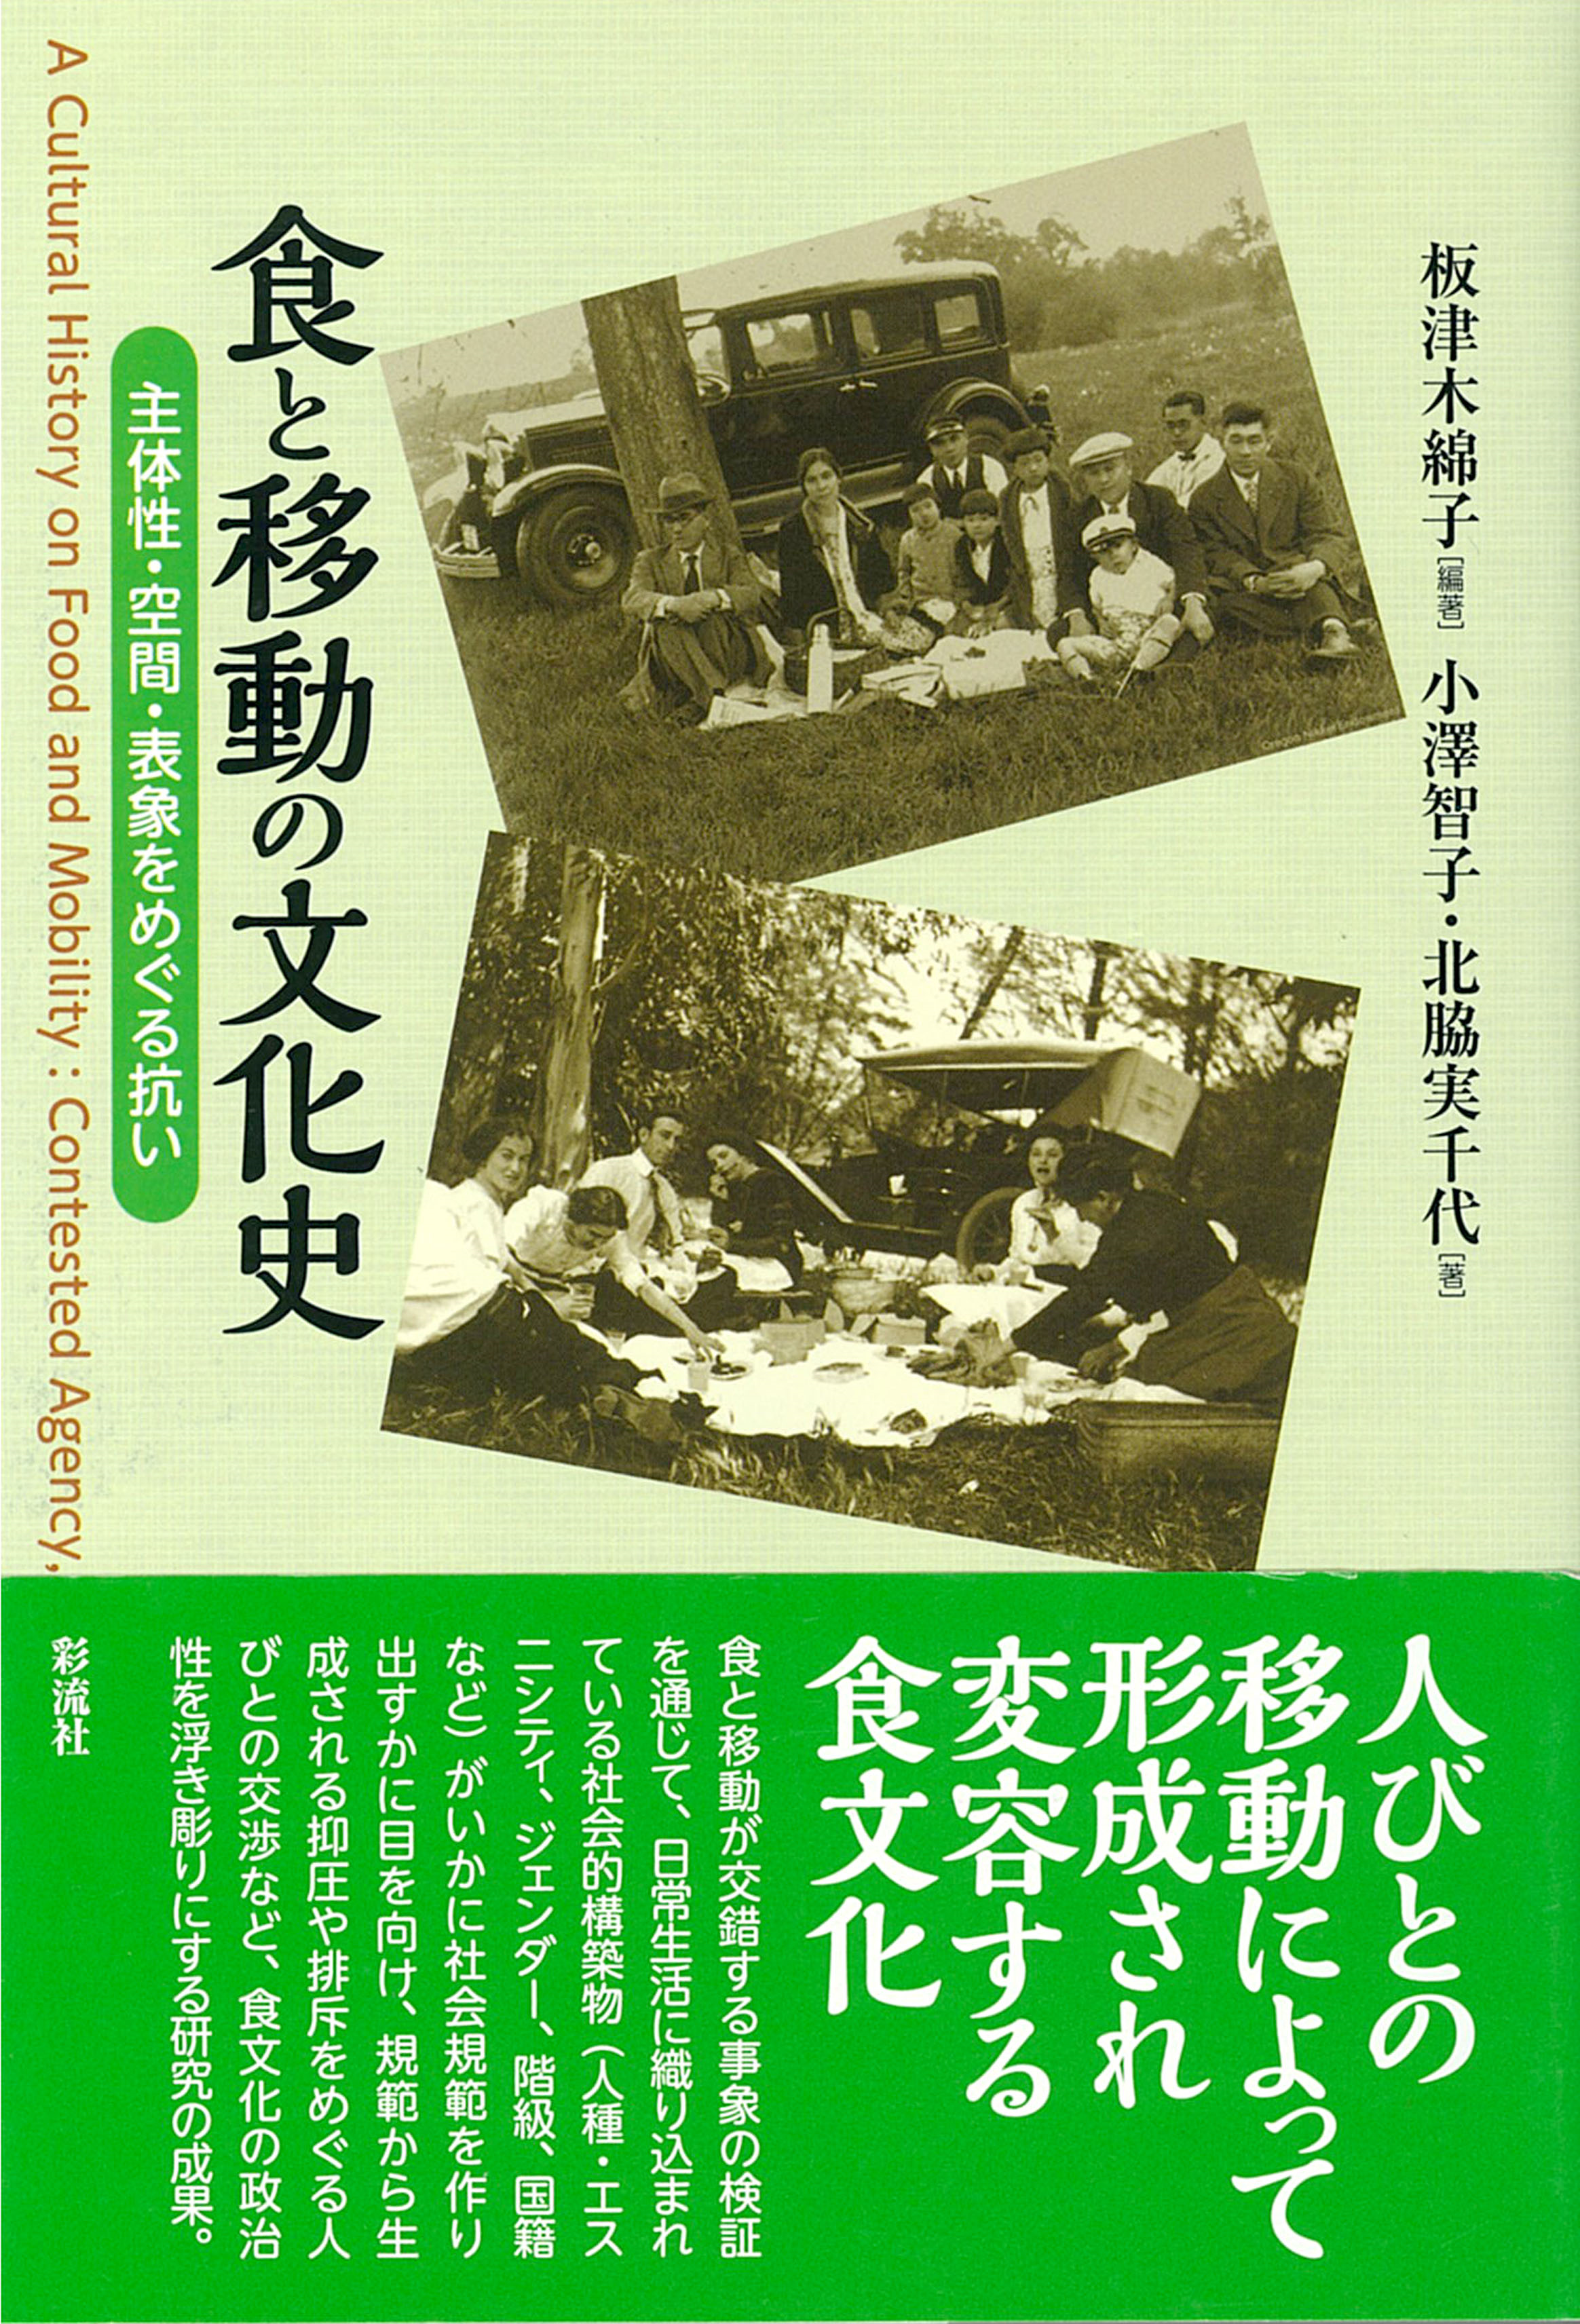 A green cover with pictures of scenes of having meals